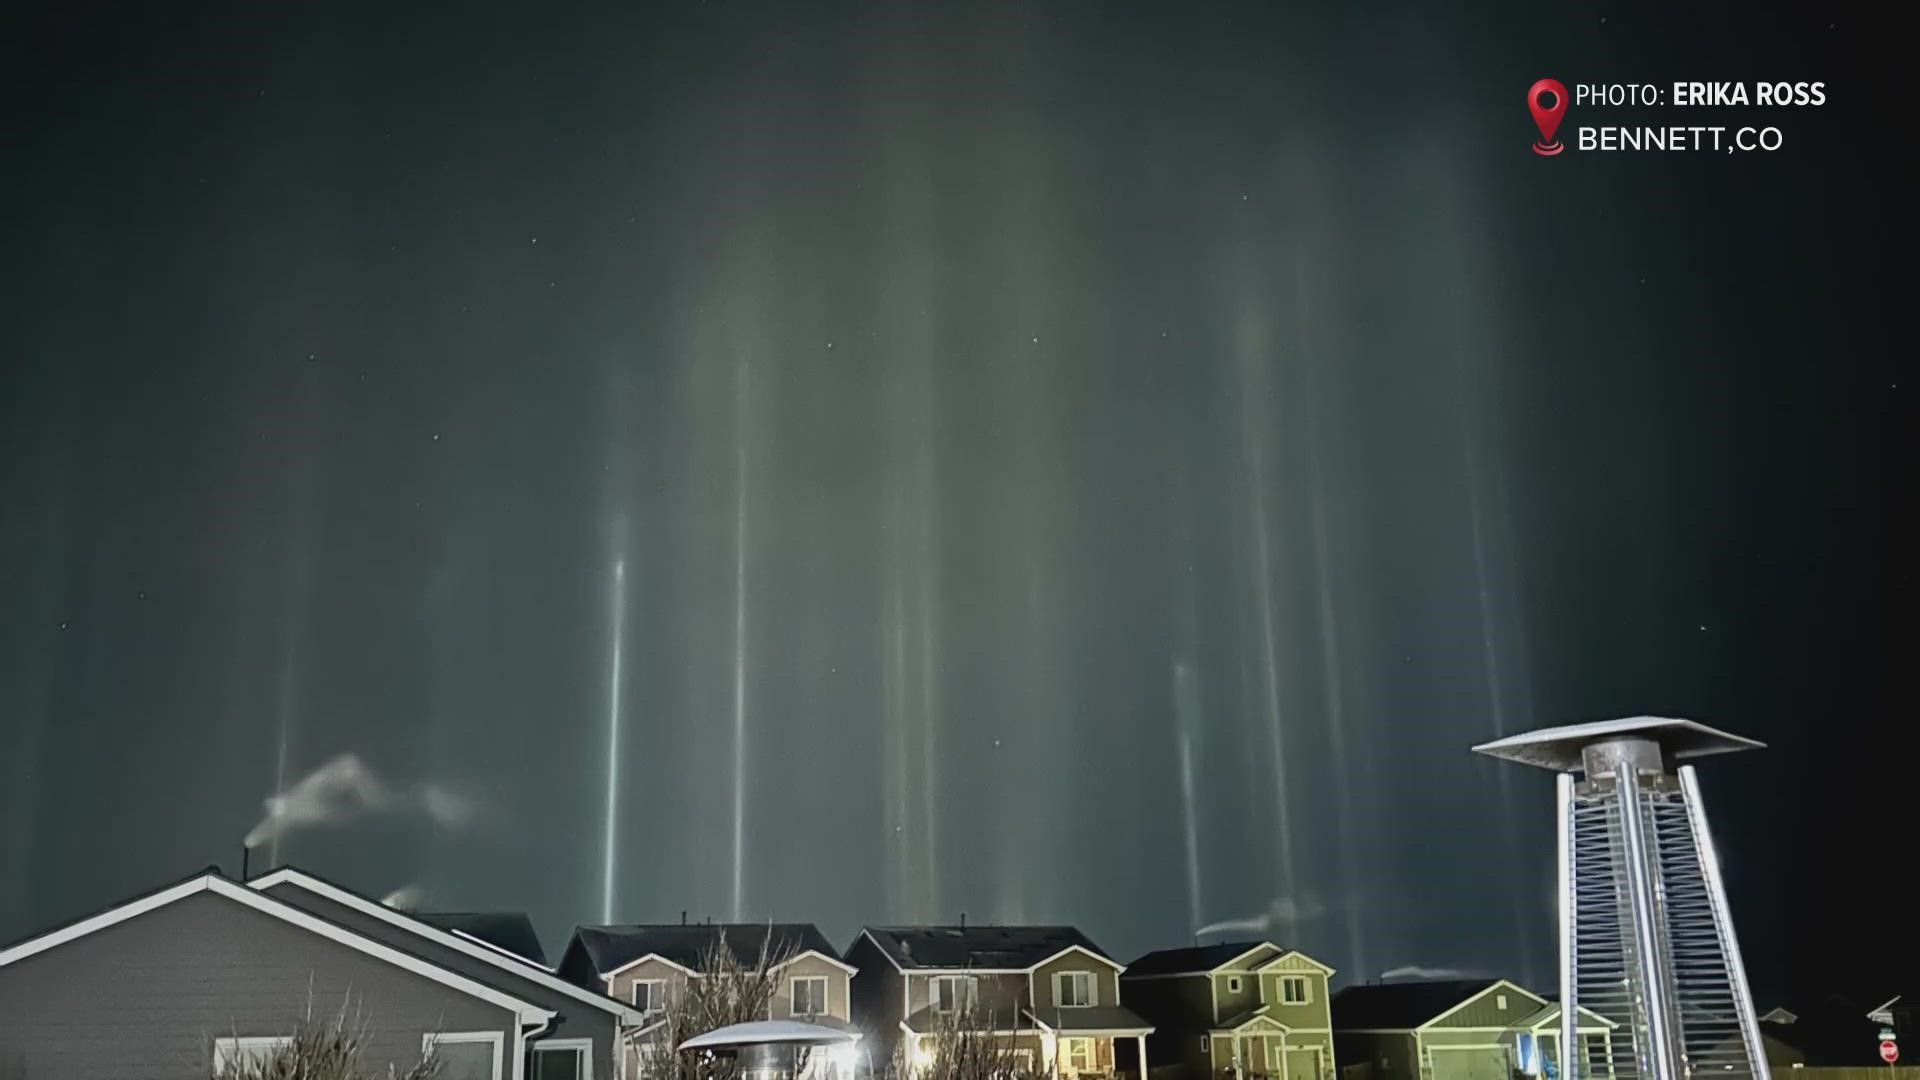 Mysterious beams of light were seen extending into the night sky over the past couple of days and pictures have been pouring into the newsroom from viewers.